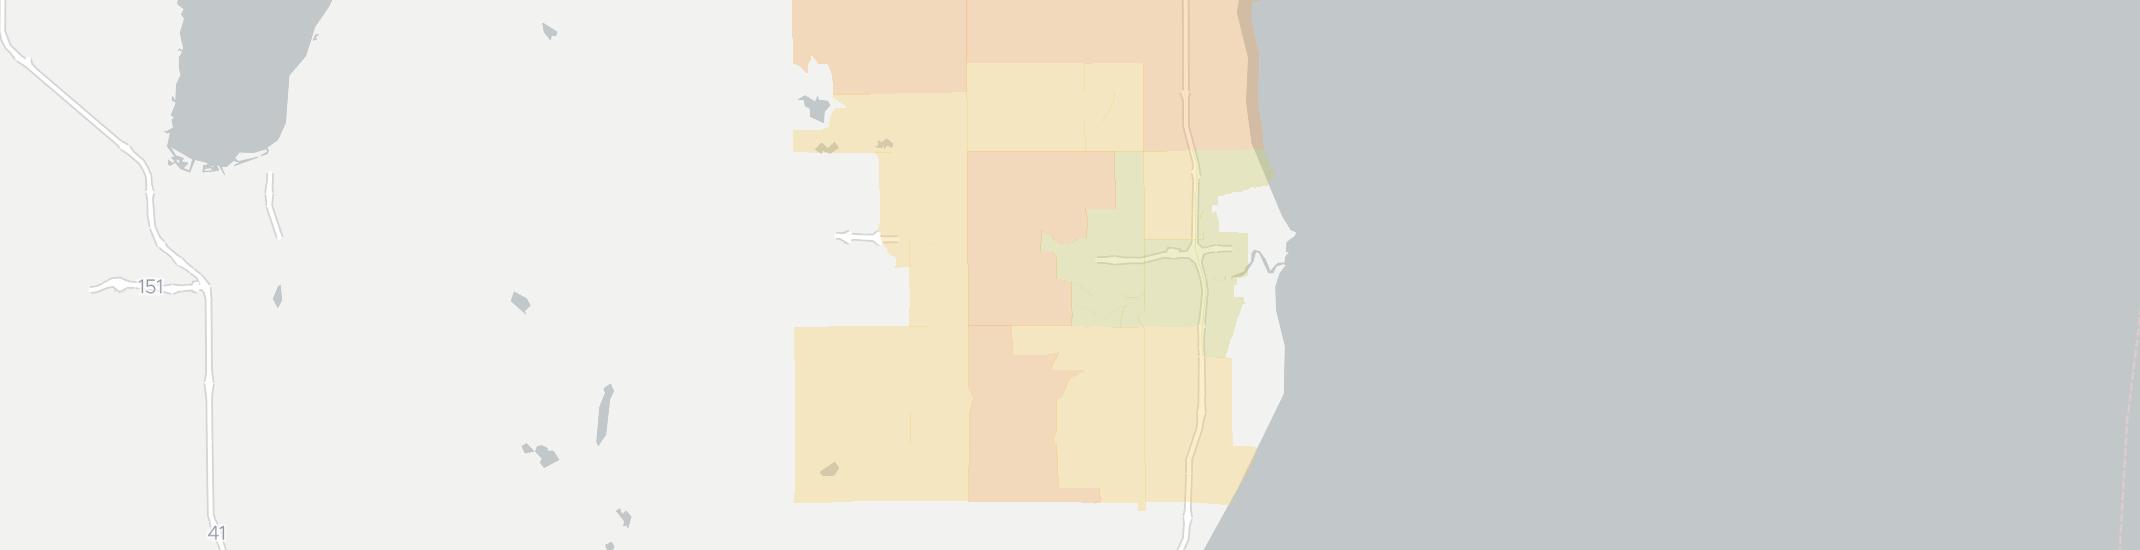 Sheboygan Falls Internet Competition Map. Click for interactive map.